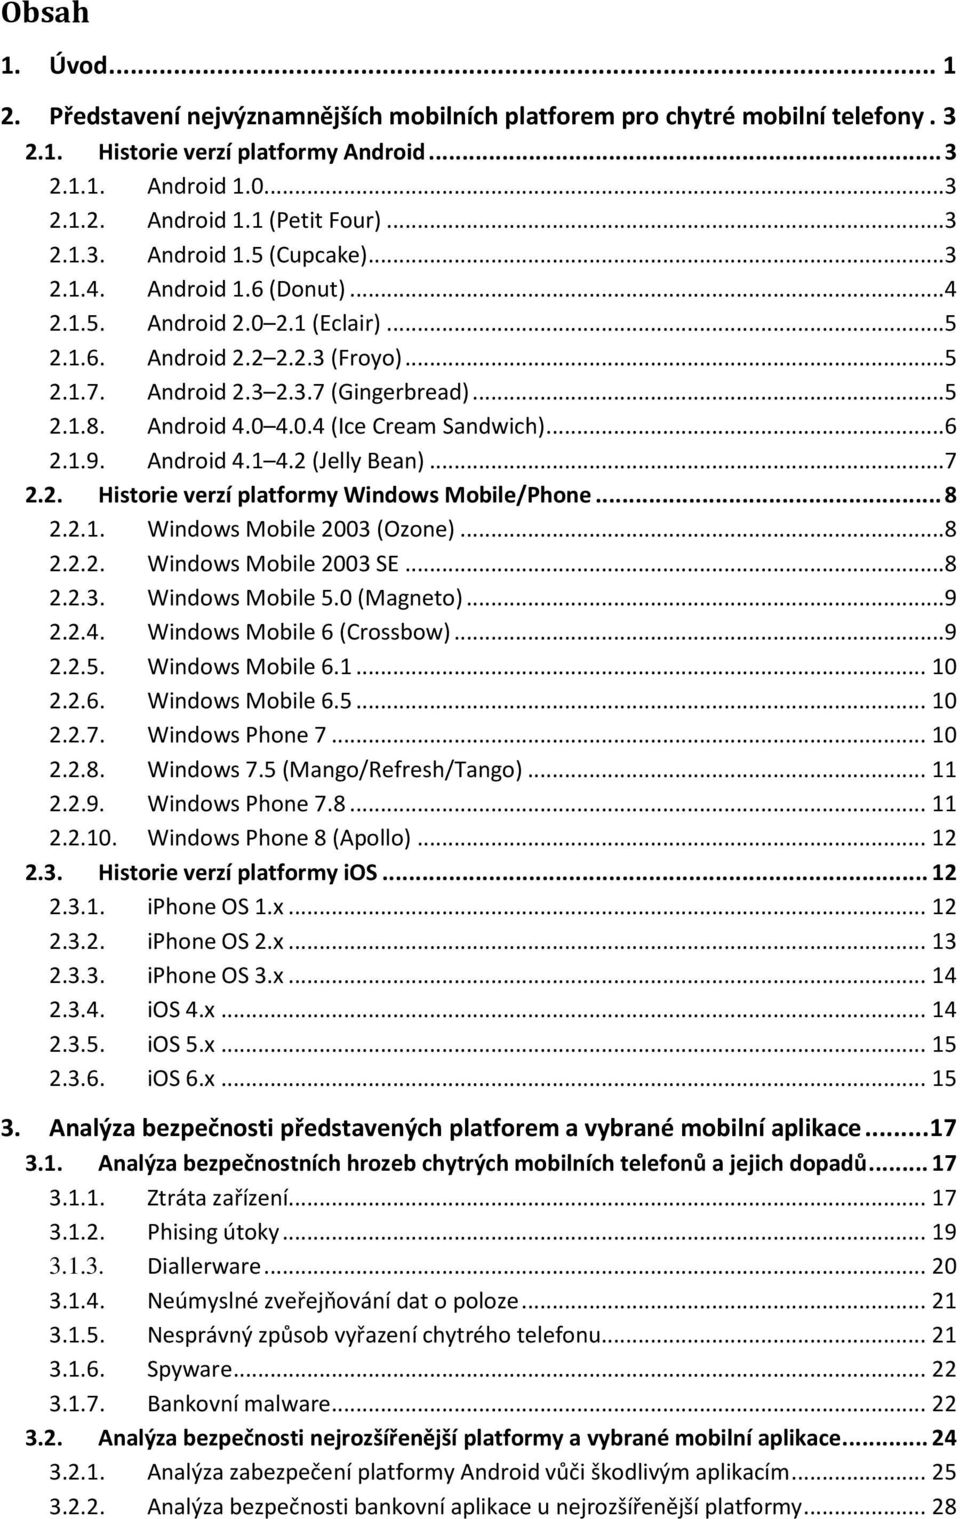 Android 4.0 4.0.4 (Ice Cream Sandwich)...6 2.1.9. Android 4.1 4.2 (Jelly Bean)...7 2.2. Historie verzí platformy Windows Mobile/Phone... 8 2.2.1. Windows Mobile 2003 (Ozone)...8 2.2.2. Windows Mobile 2003 SE.